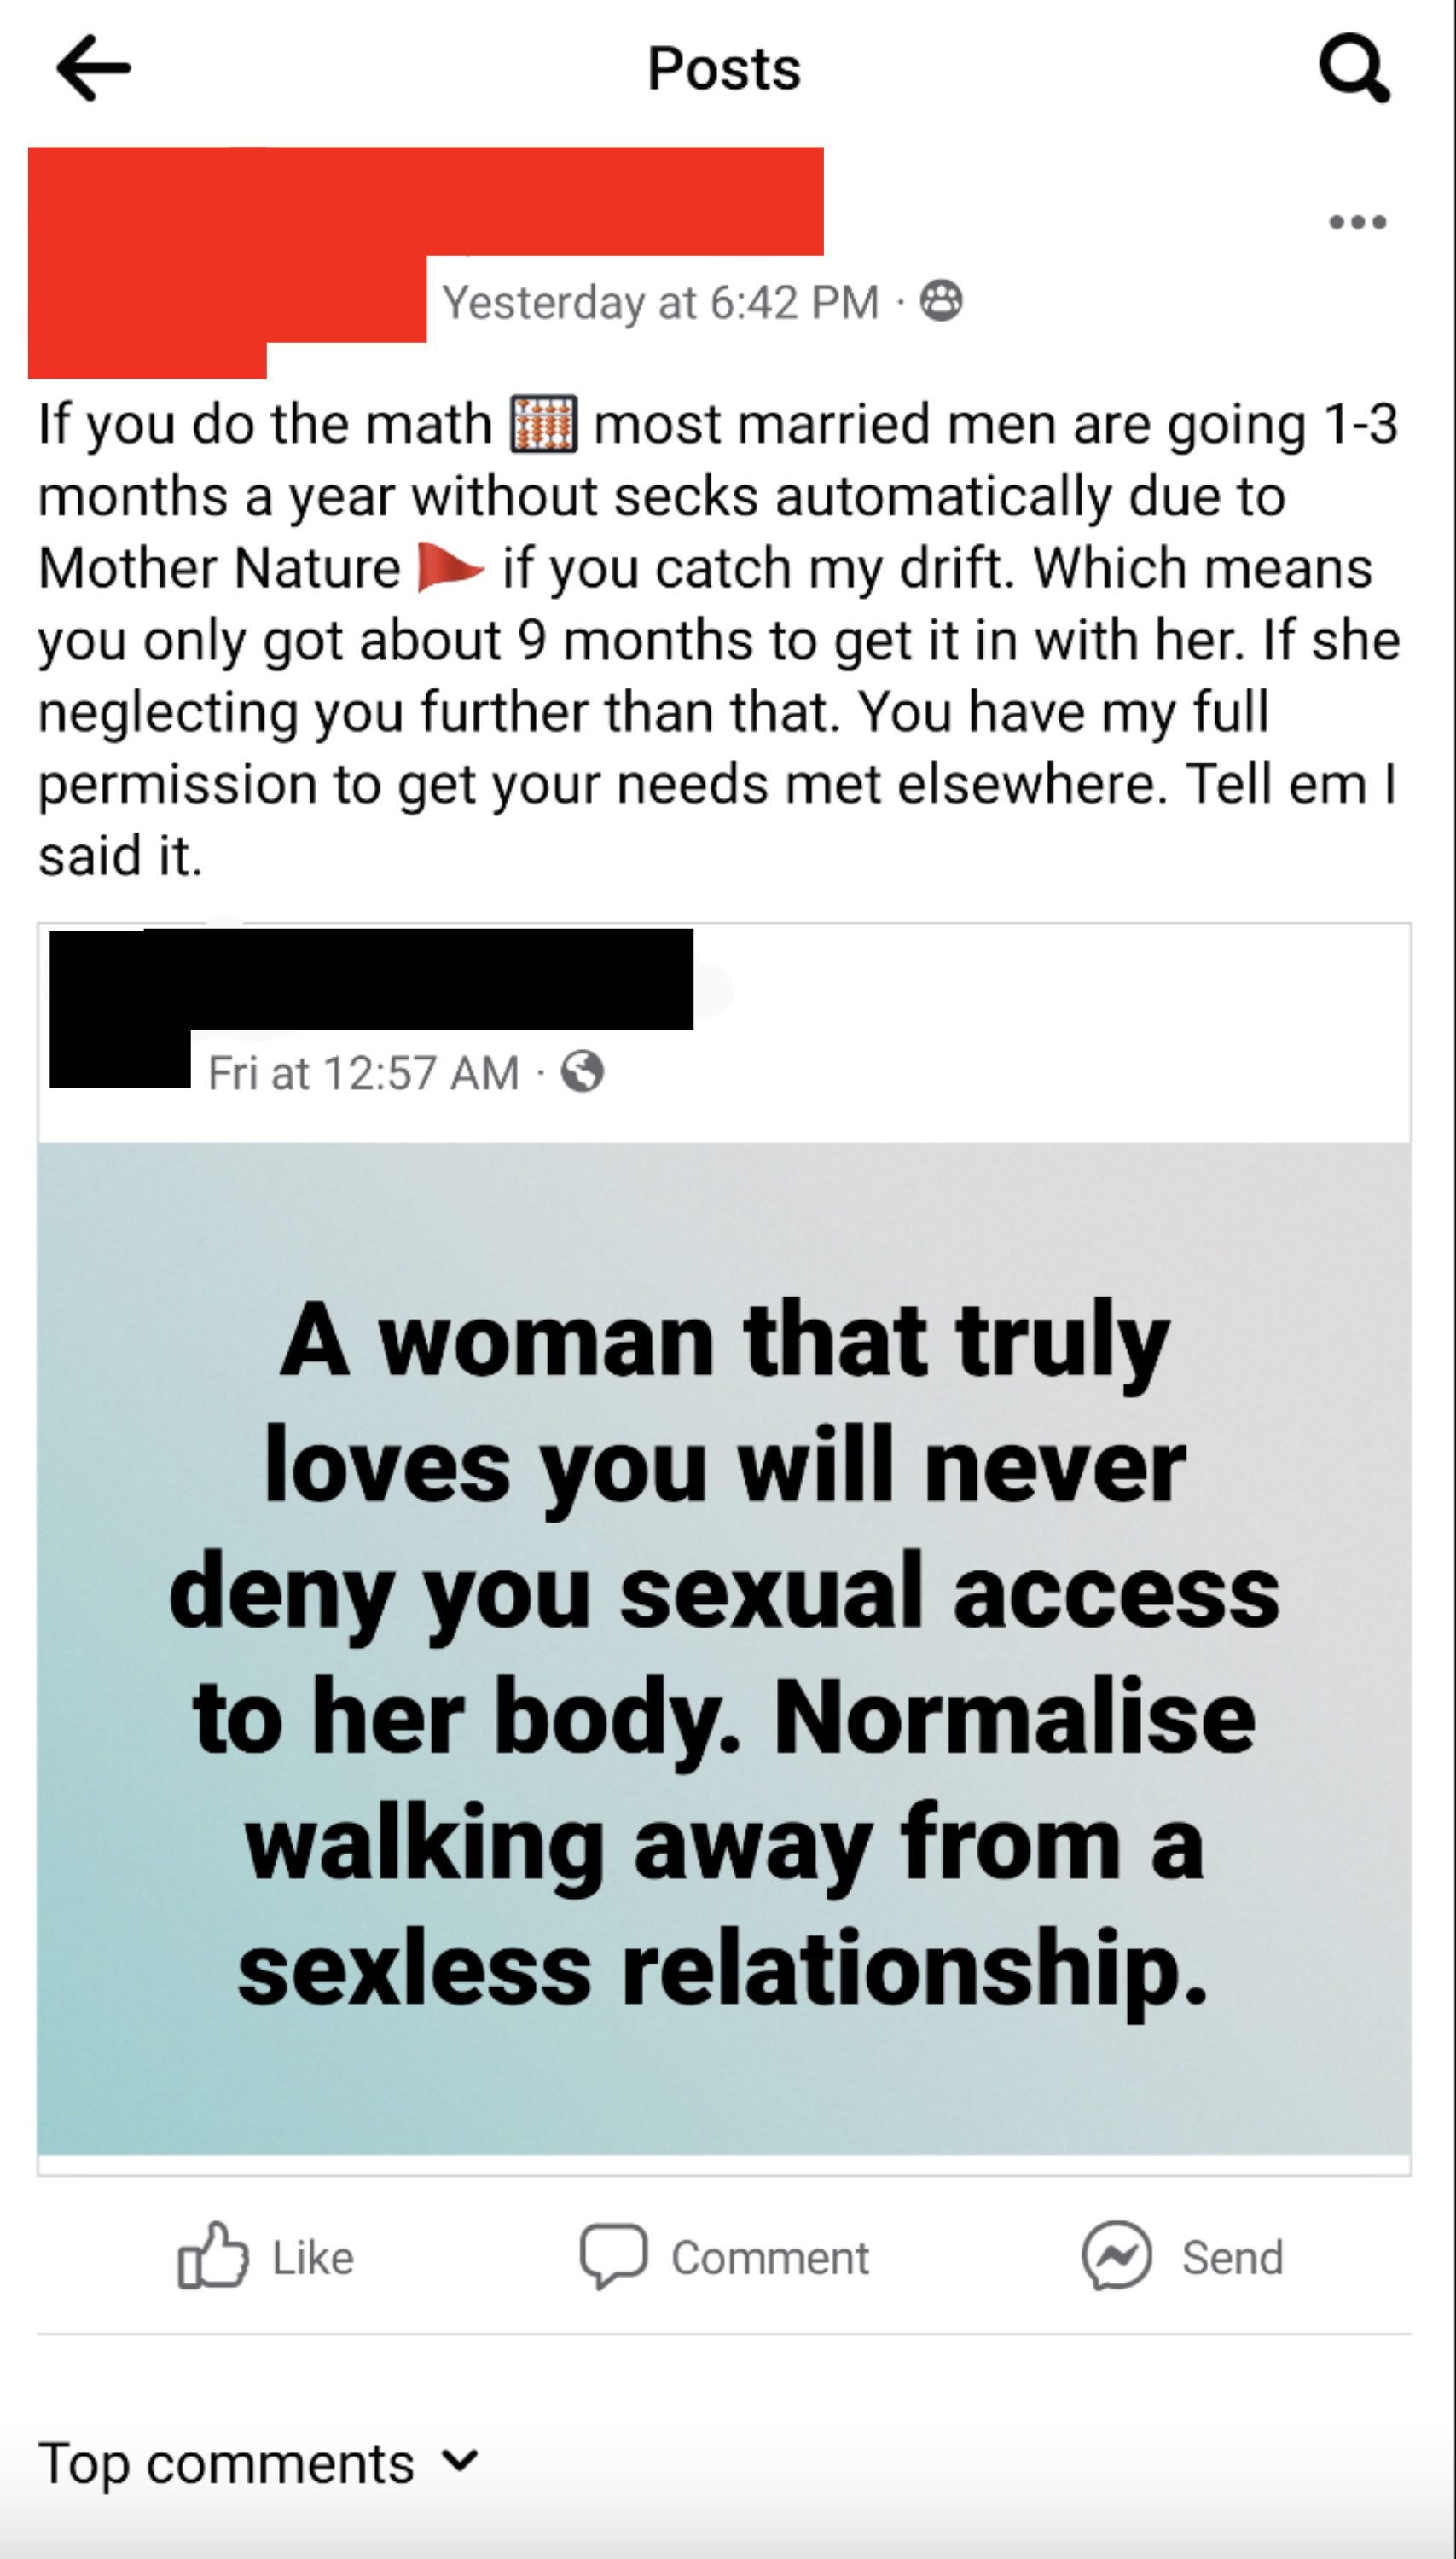 &quot;Normalise walking away form a sexless relationship.&quot;